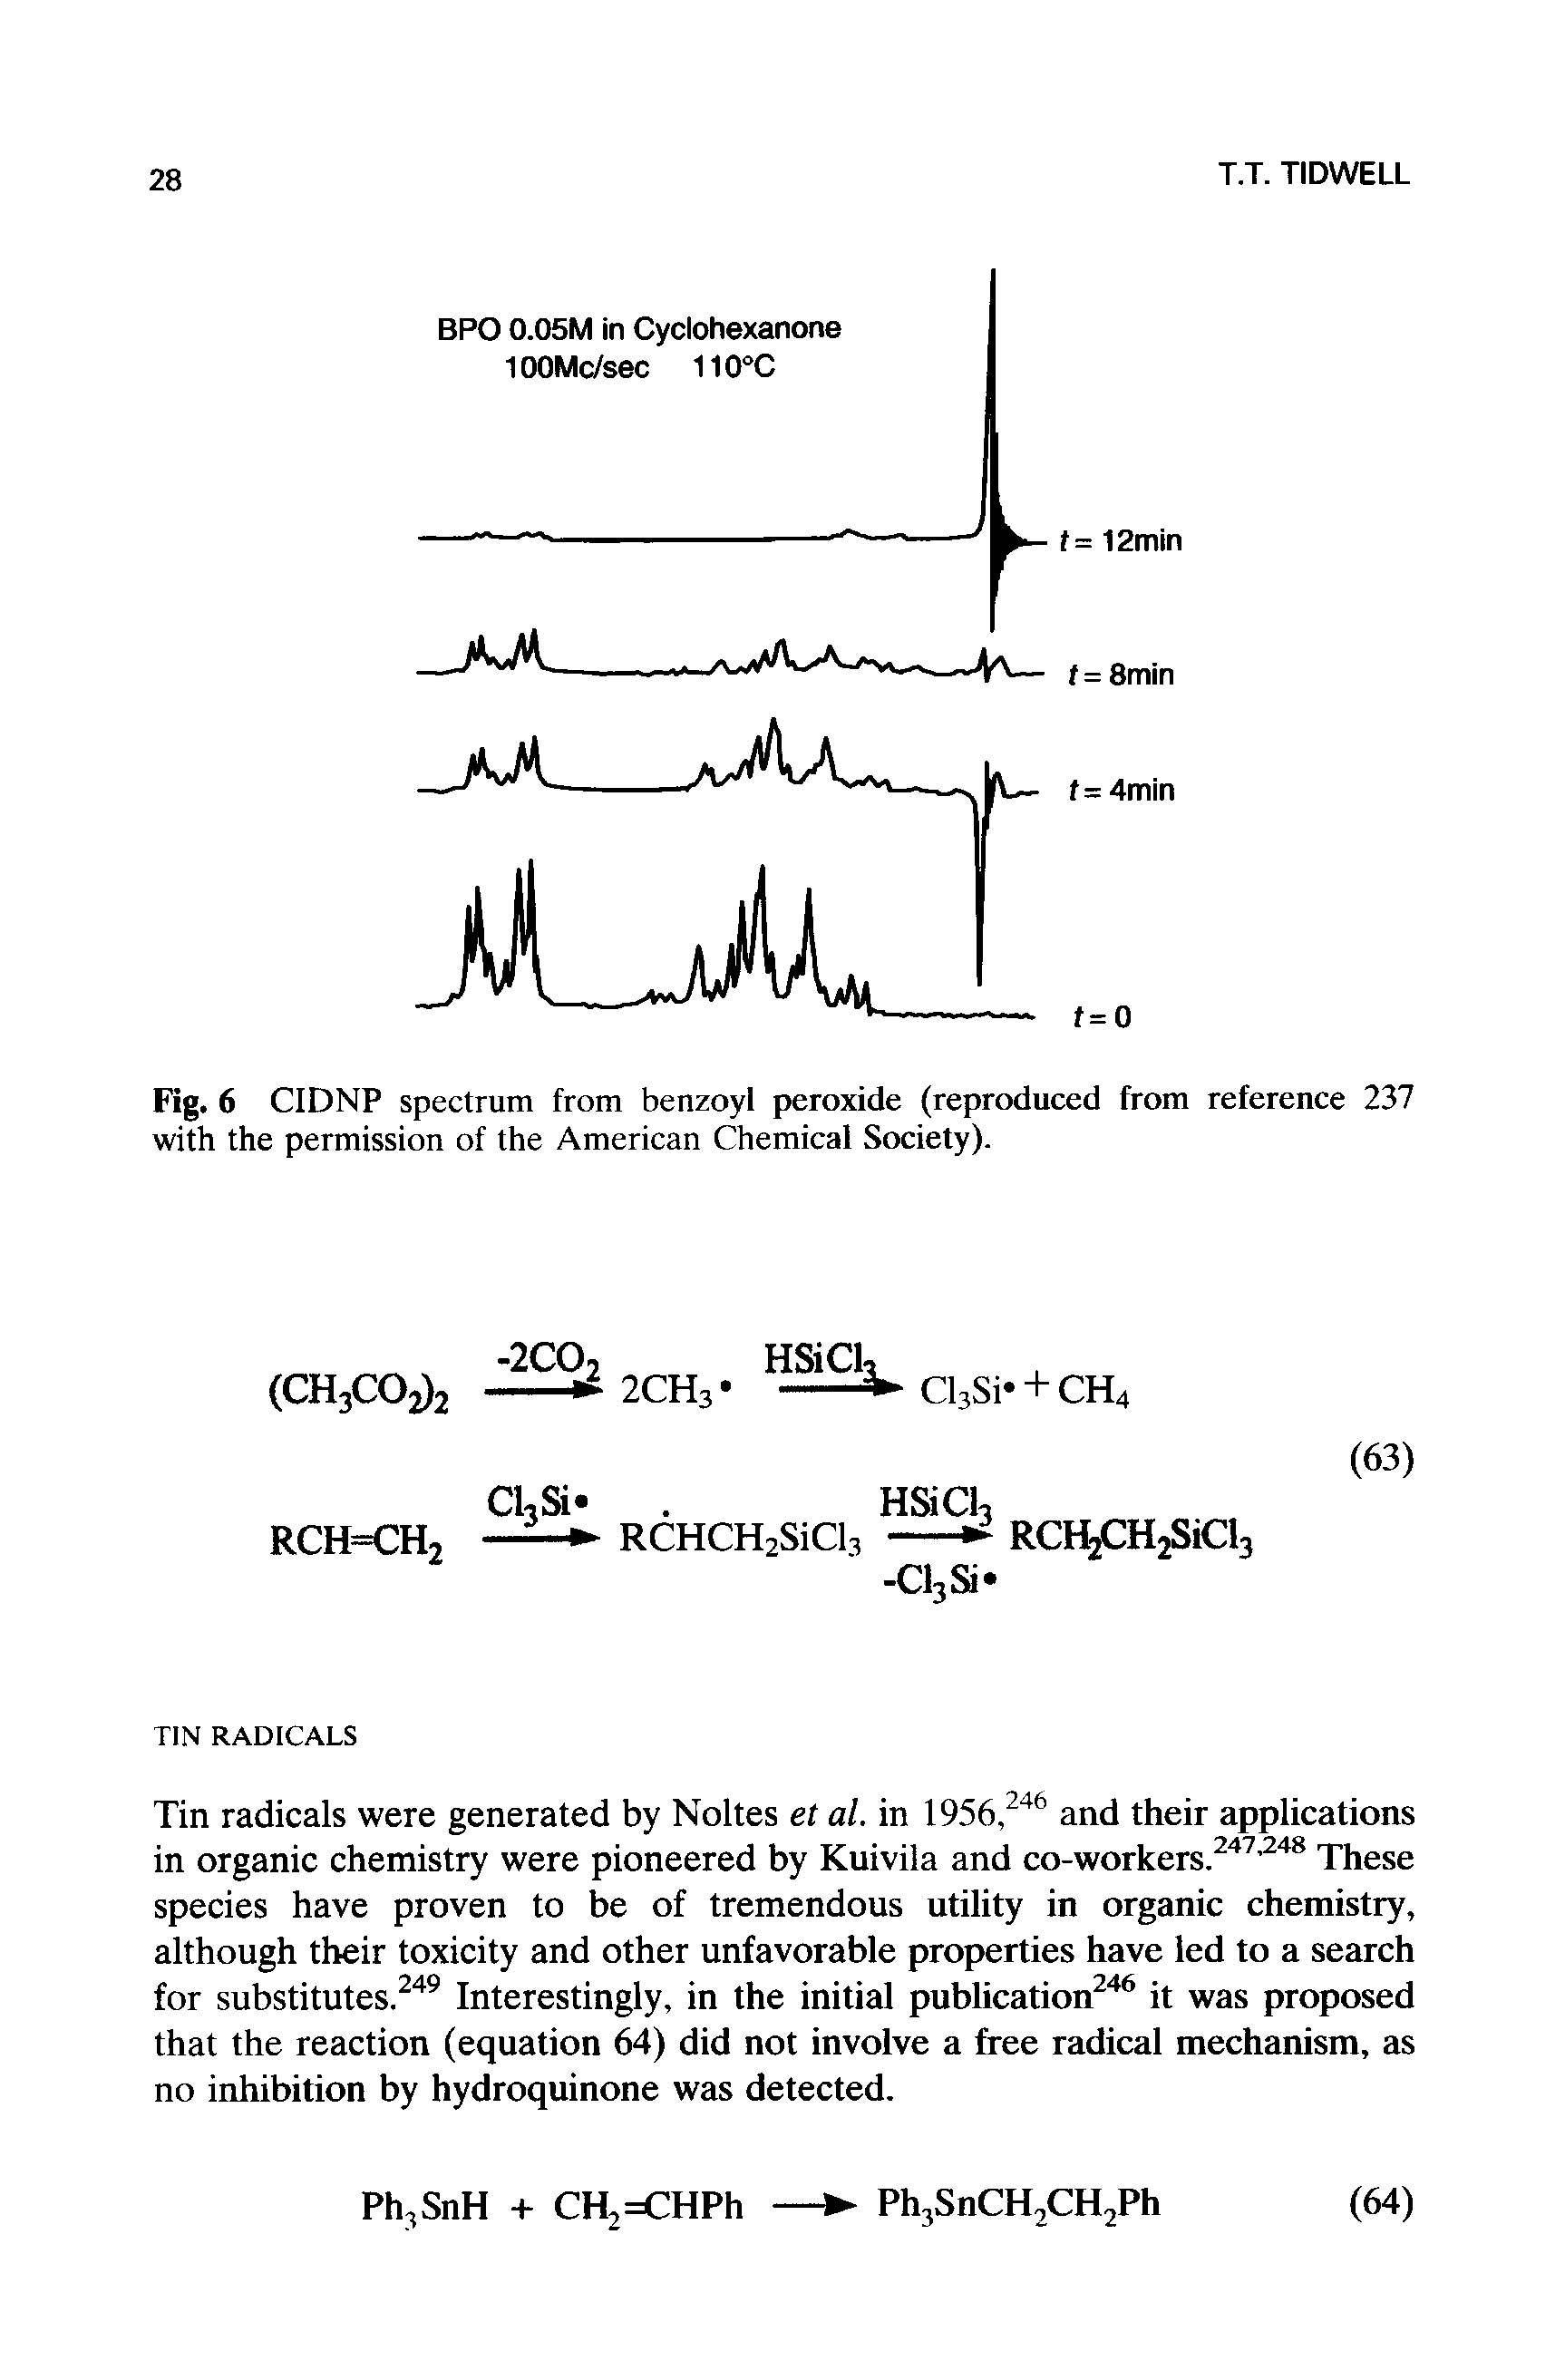 Fig. 6 CIDNP spectrum from benzoyl peroxide (reproduced from reference 237 with the permission of the American Chemical Society).